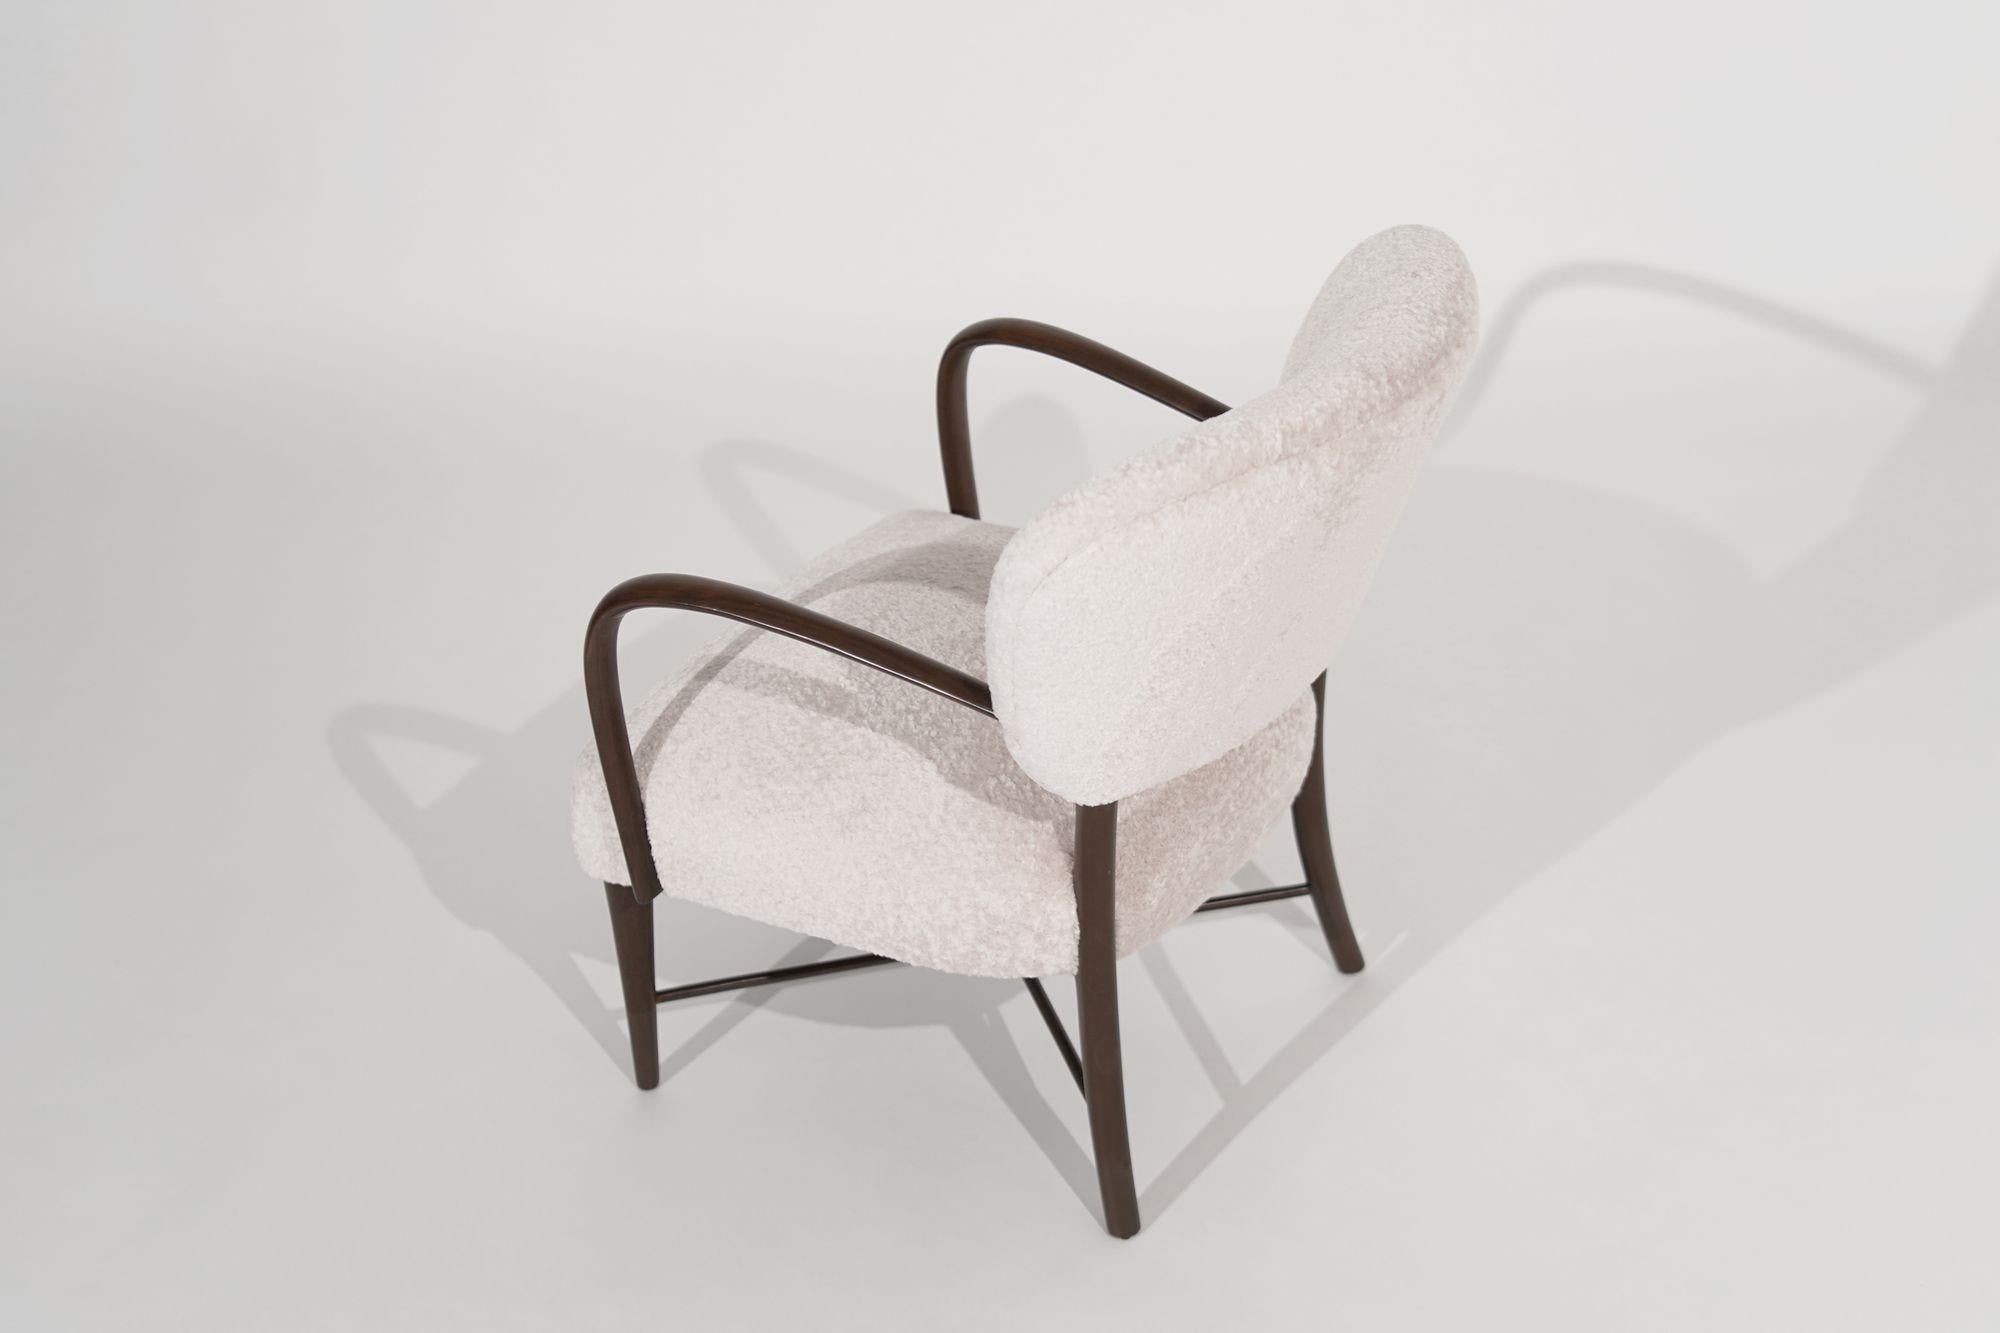 20th Century Italian Accent Chair in Wool, C. 1950s